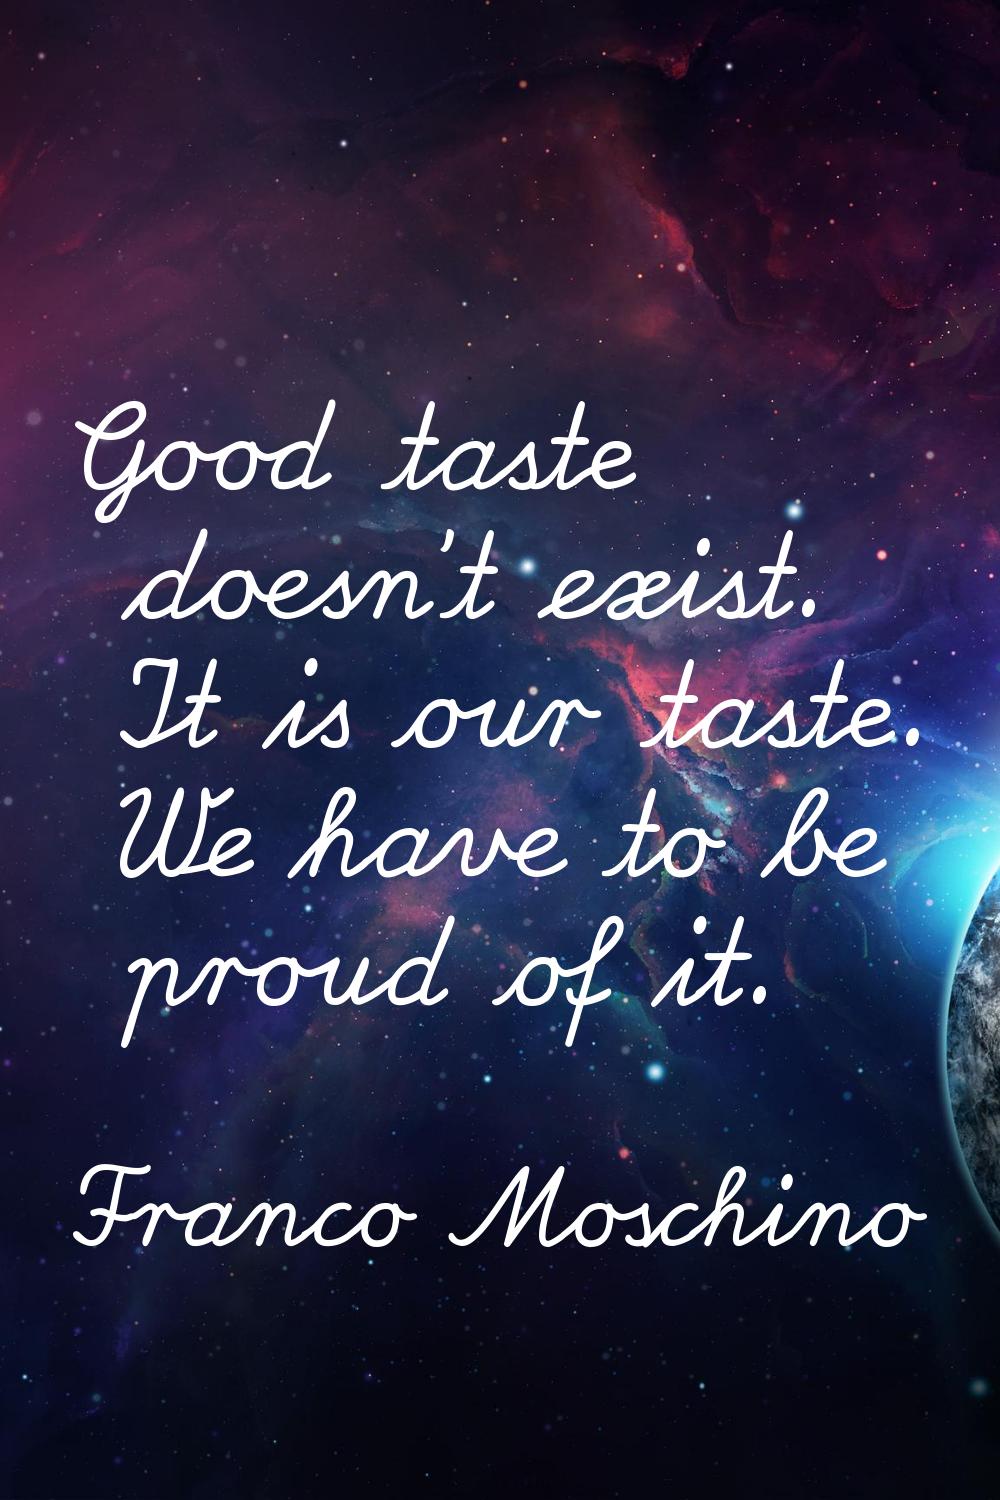 Good taste doesn't exist. It is our taste. We have to be proud of it.